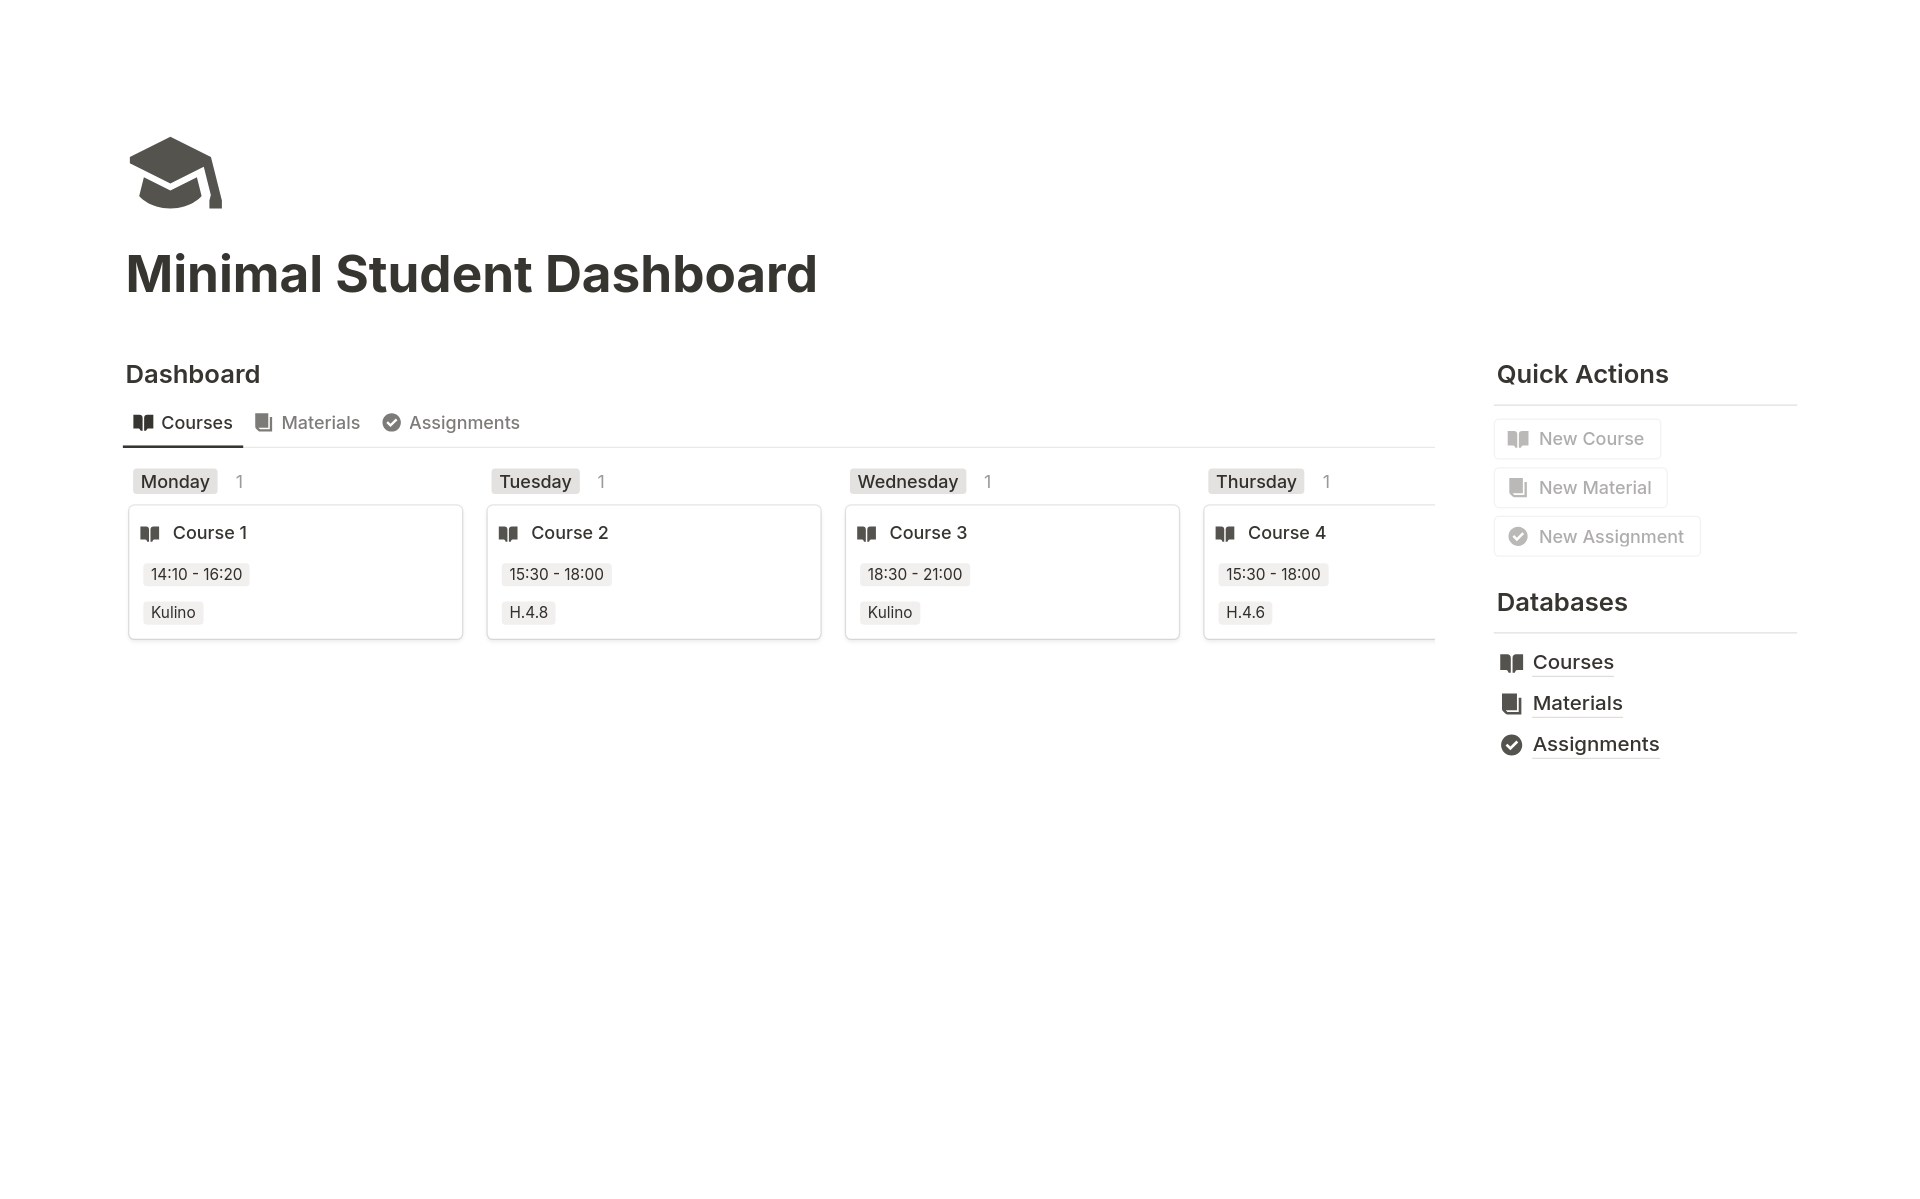 Minimal Student Dashboard is a Notion template designed to help students efficiently organize and track their studies. This dashboard includes quick links to databases for courses, materials, and assignments, allowing easy and quick access to all essential resources.